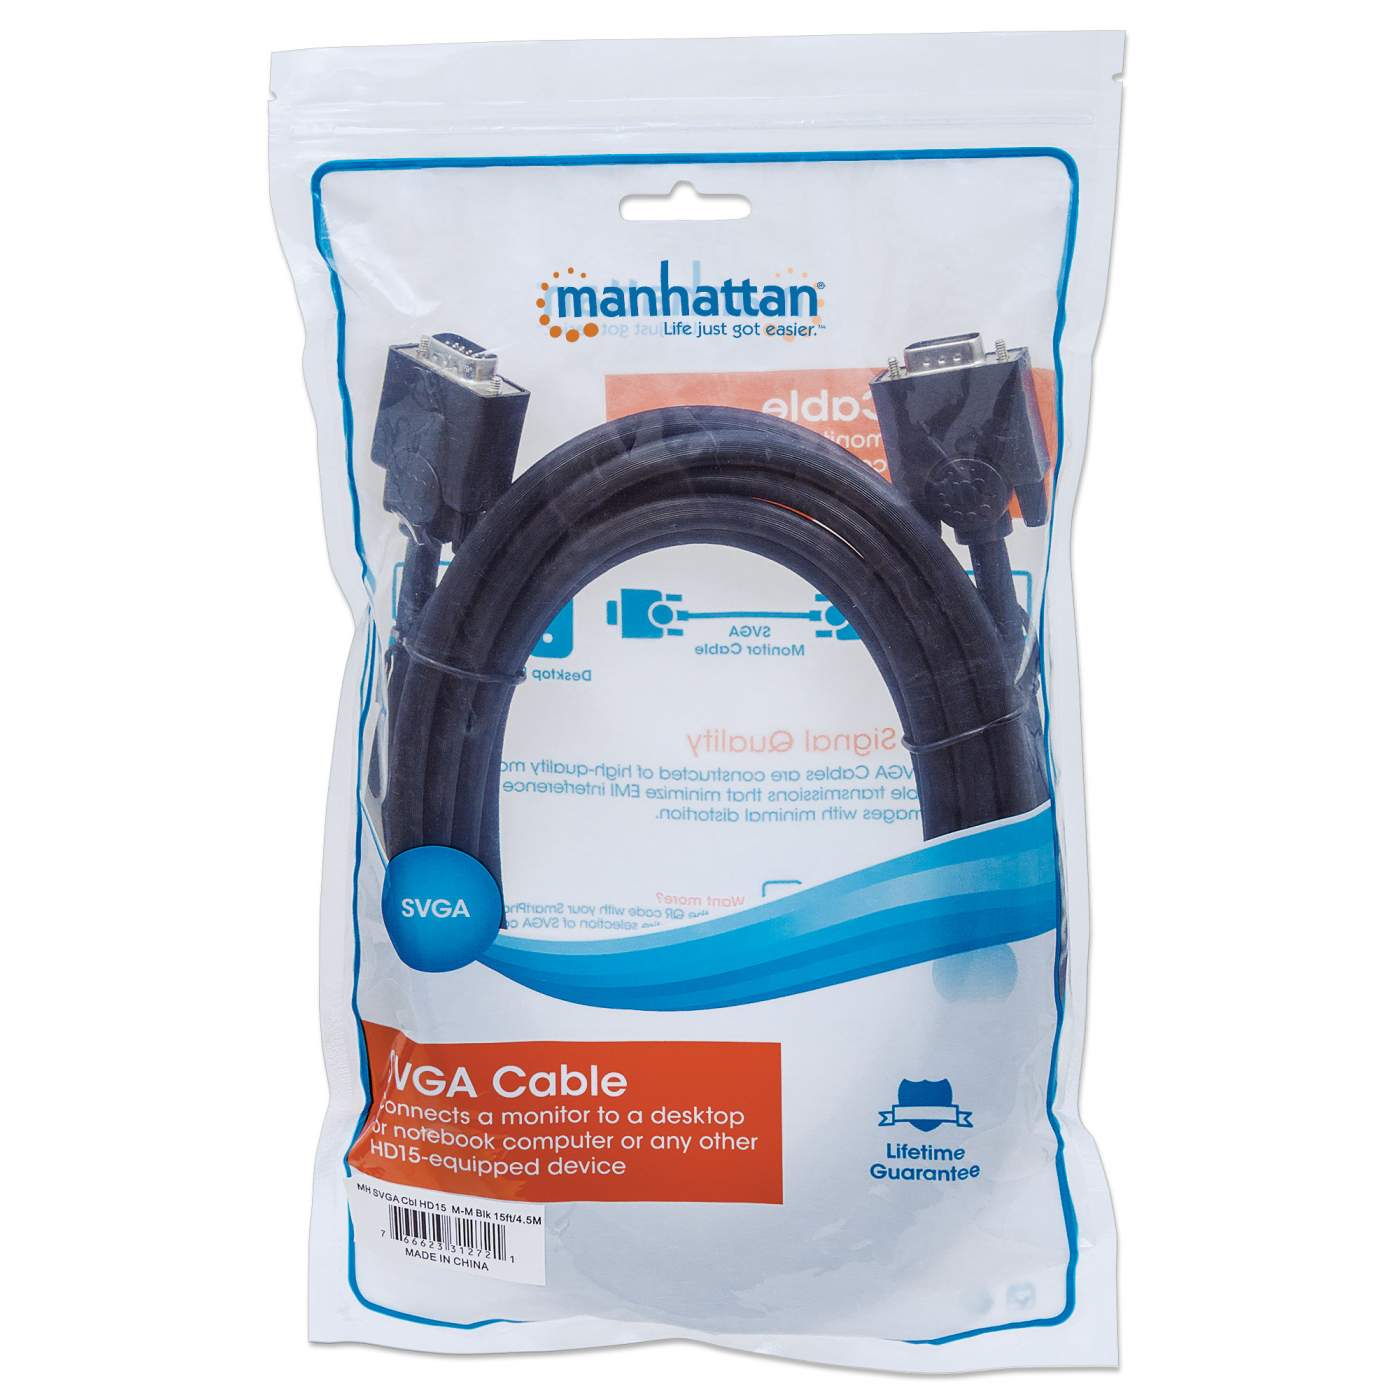 SVGA Monitor Cable Packaging Image 2